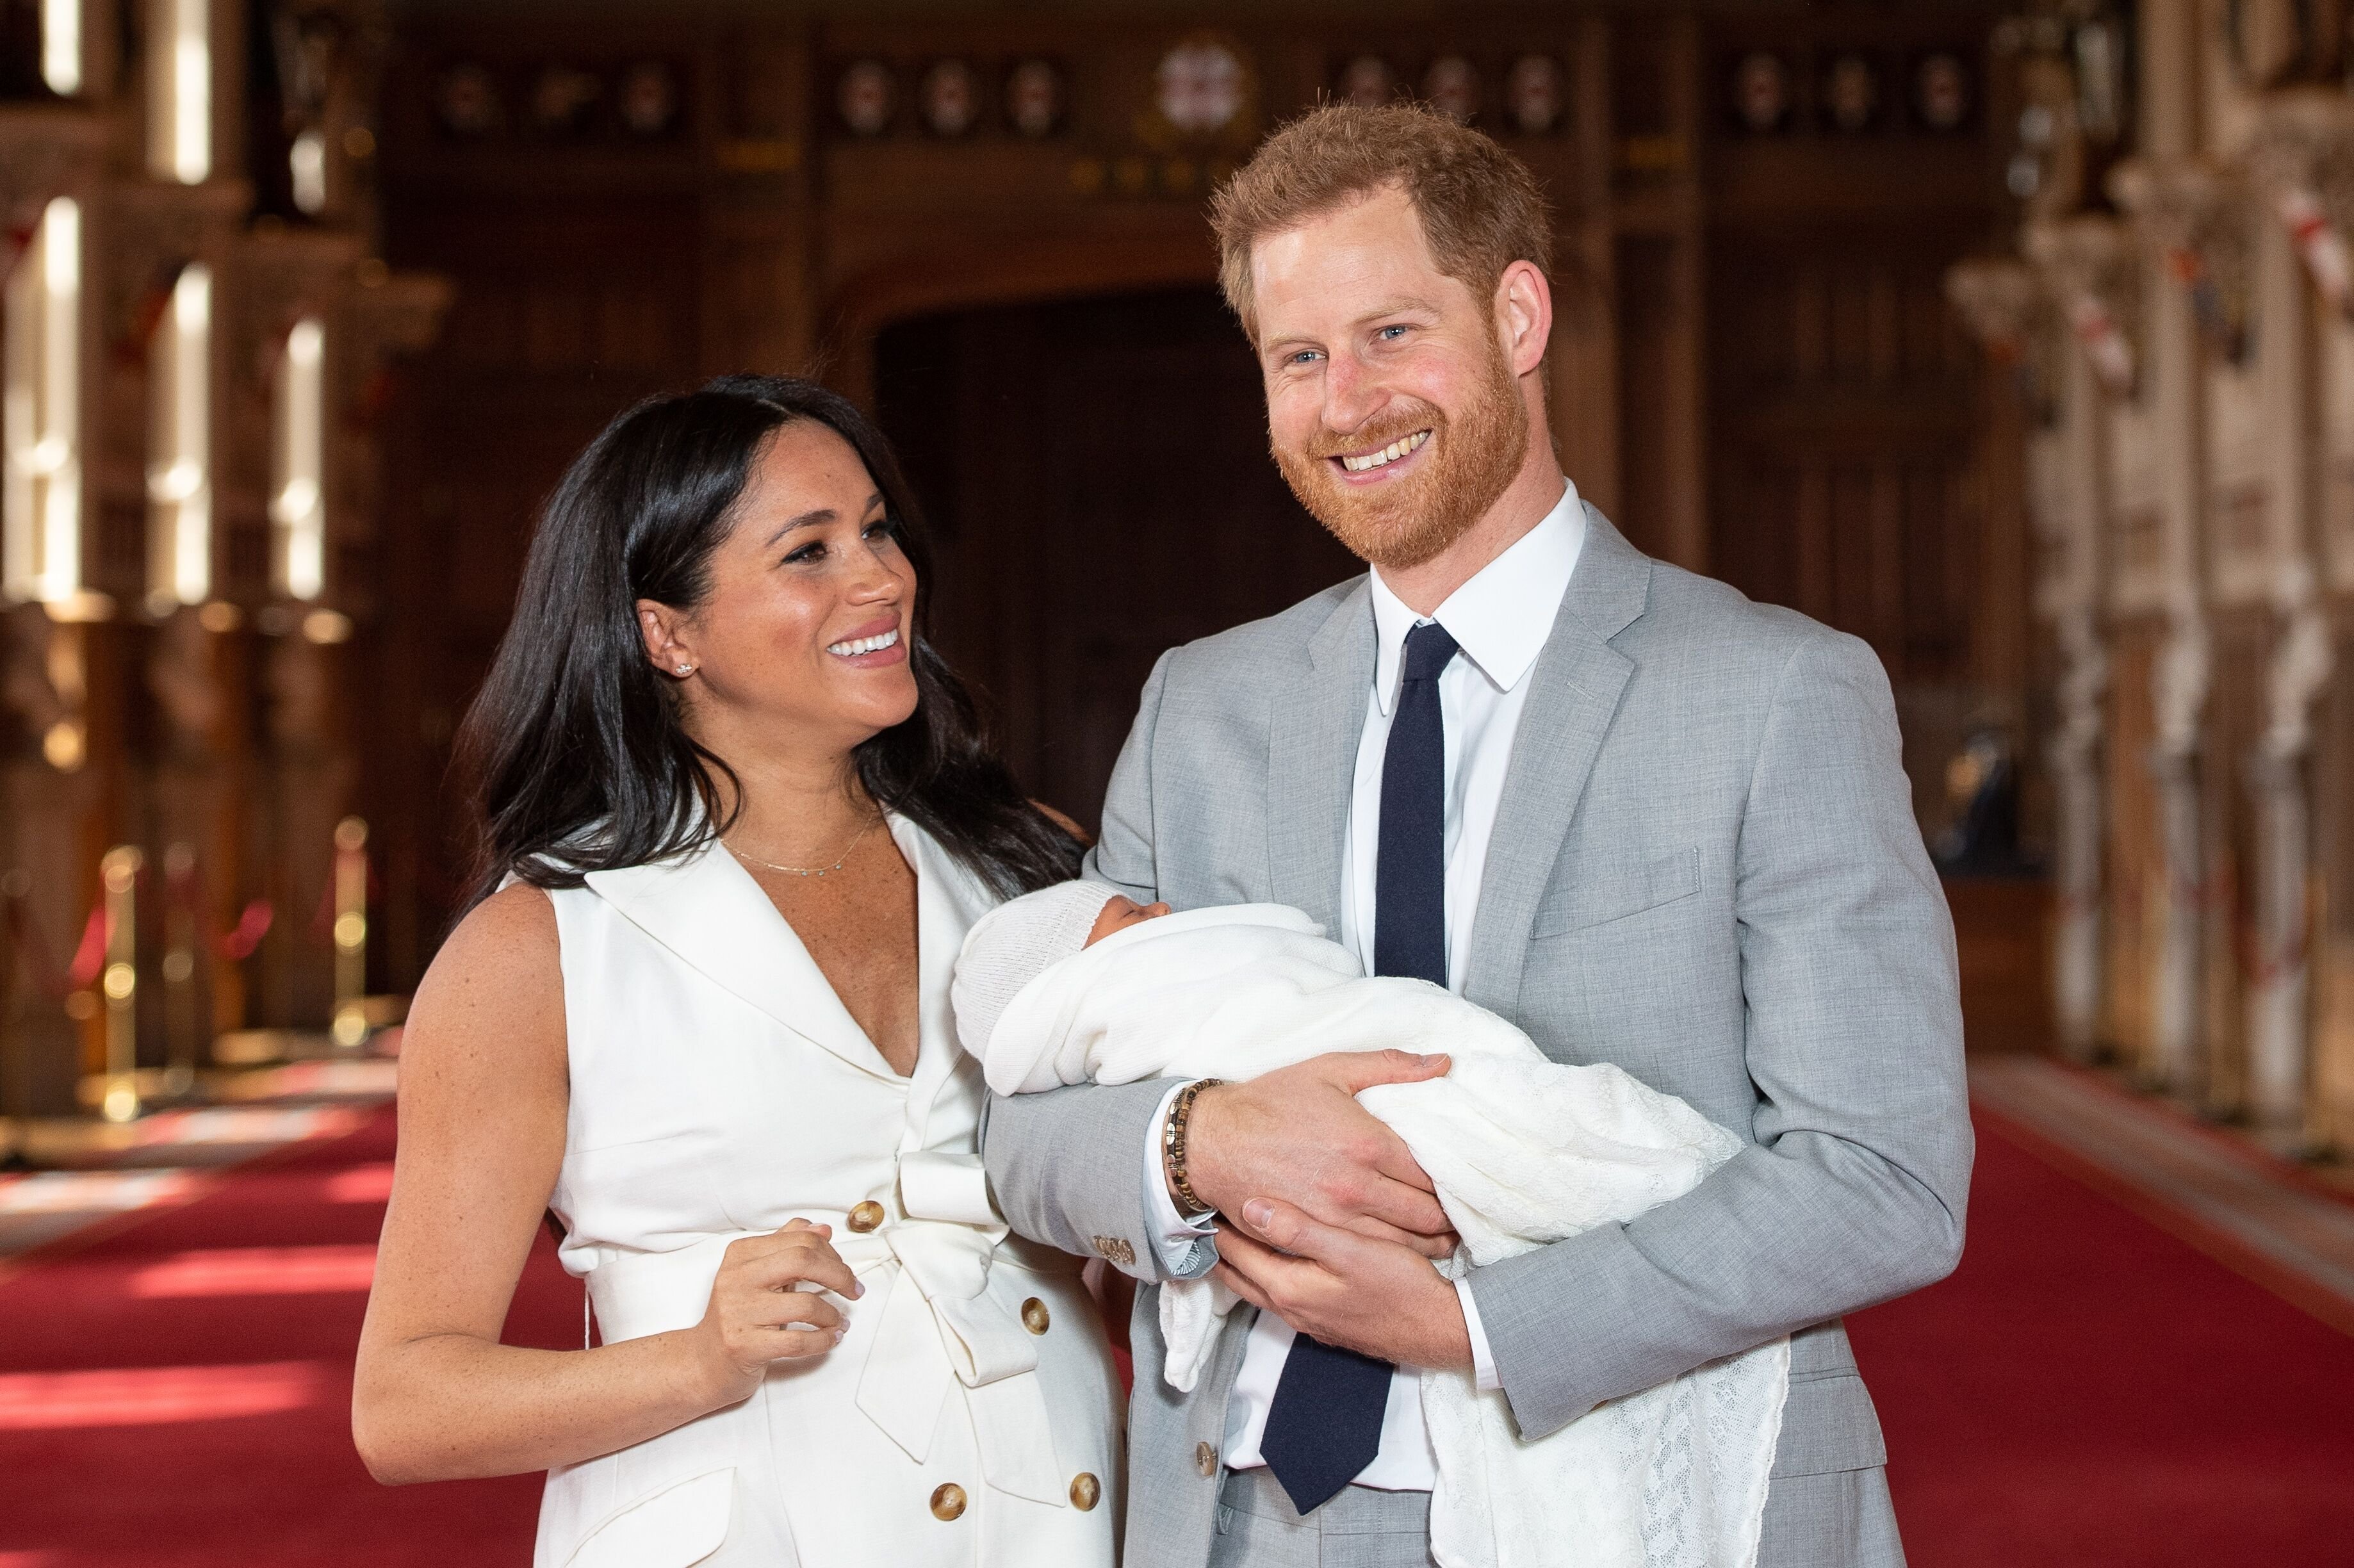 Meghan Markle and Prince Harry introduce baby Archie Harrison at St. George's Hall. | Source: Getty Images